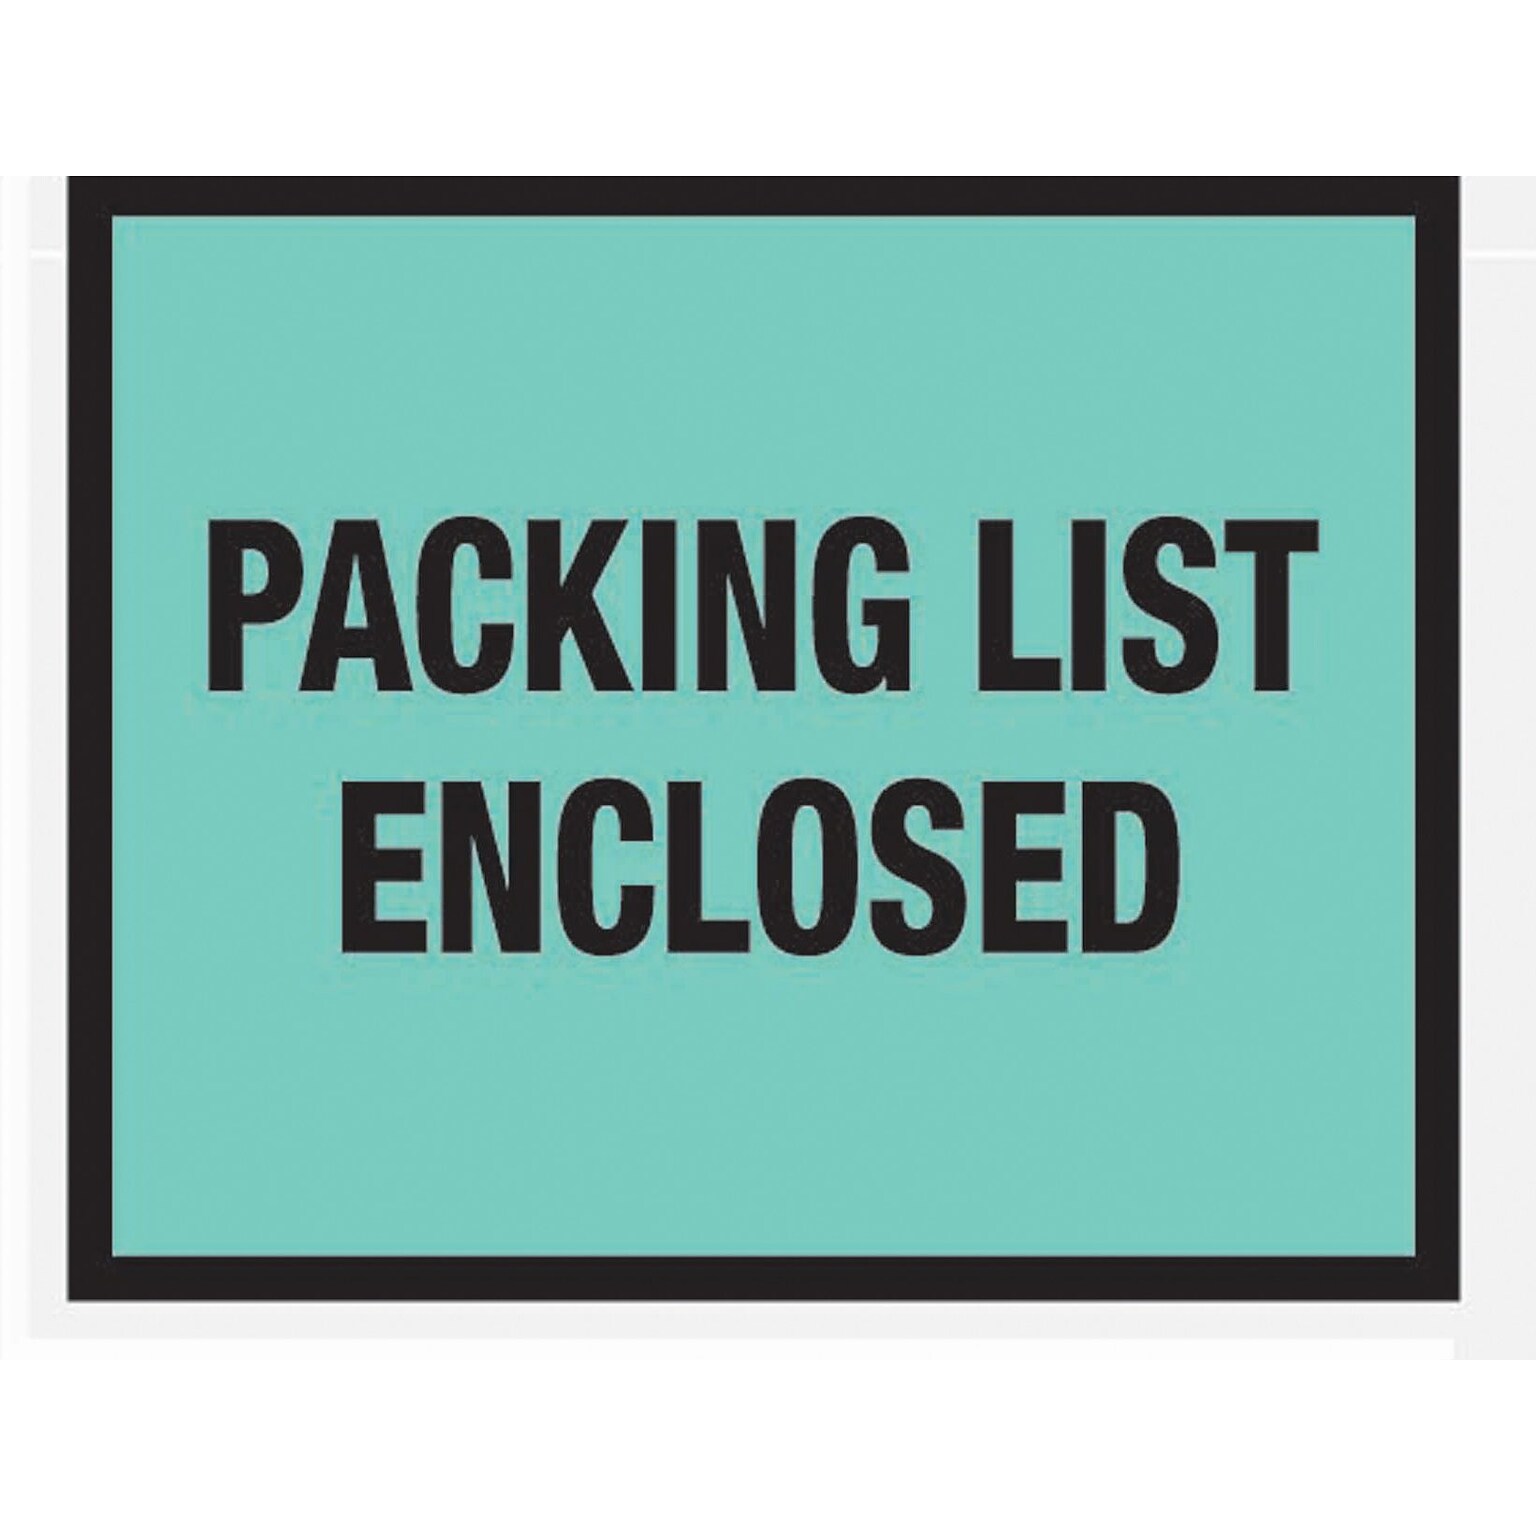 SI Products Packing List Envelopes, 7 x 5.5, Green Full Face, Packing List Enclosed, 1000/Case (PL408)